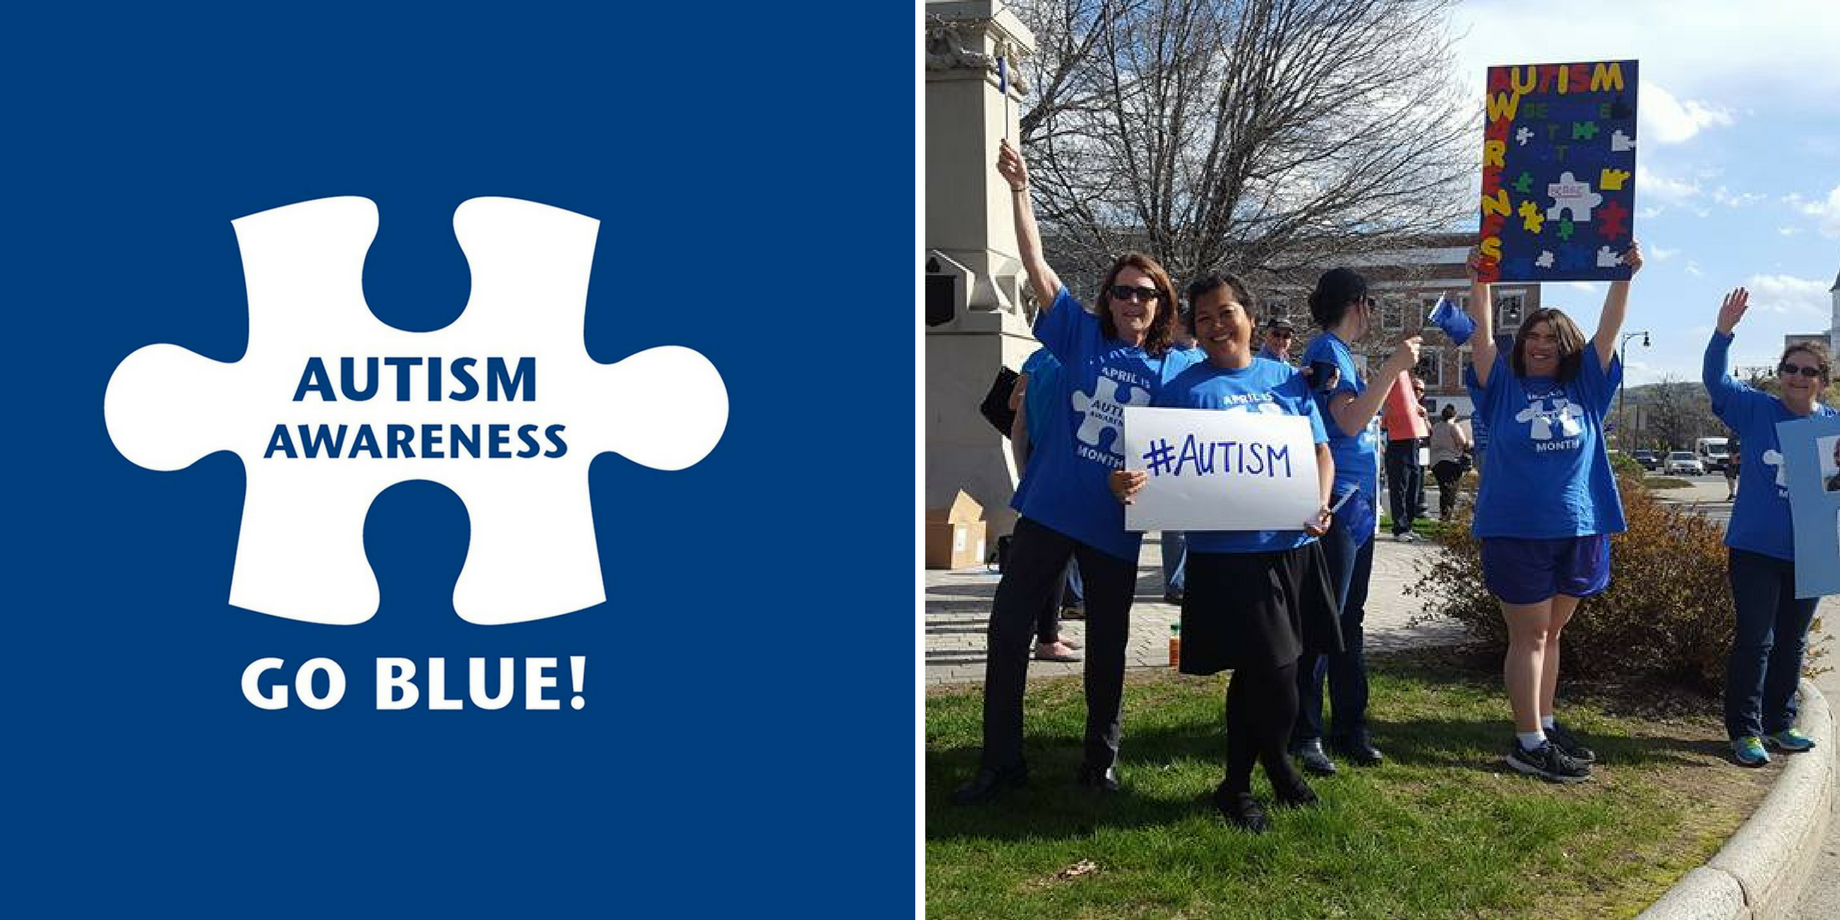 April is Autism Awareness and Acceptance Month! Downtown Pittsfield